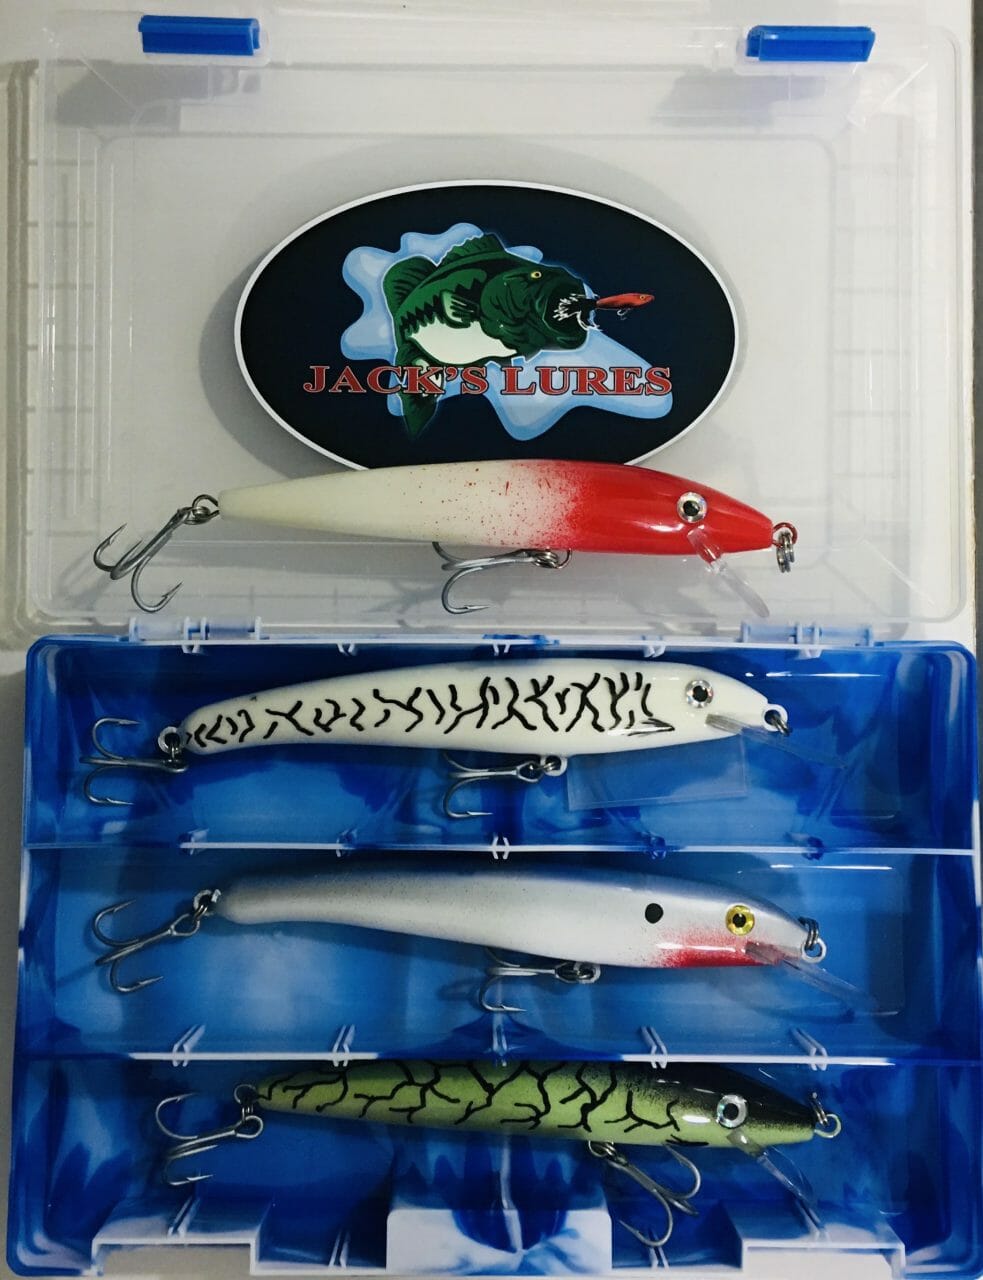 Jack's Lures Salt Water Fishing Lures – Bids For The Kids by